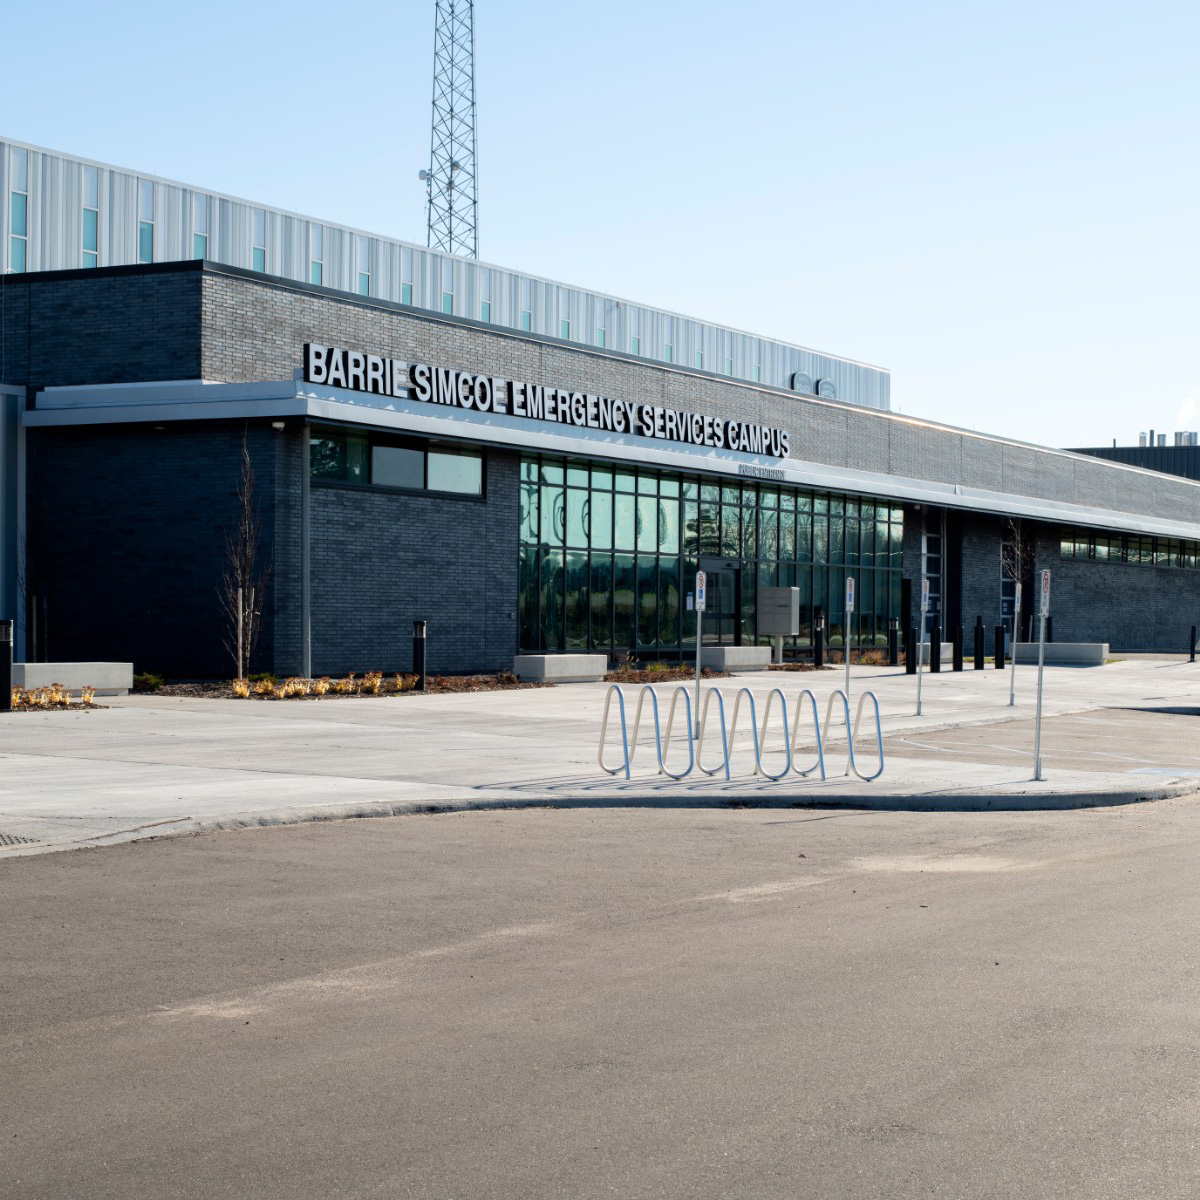 A photo of the exterior of the Barrie Simcoe Emergency Services building in Barrie, Ontario.